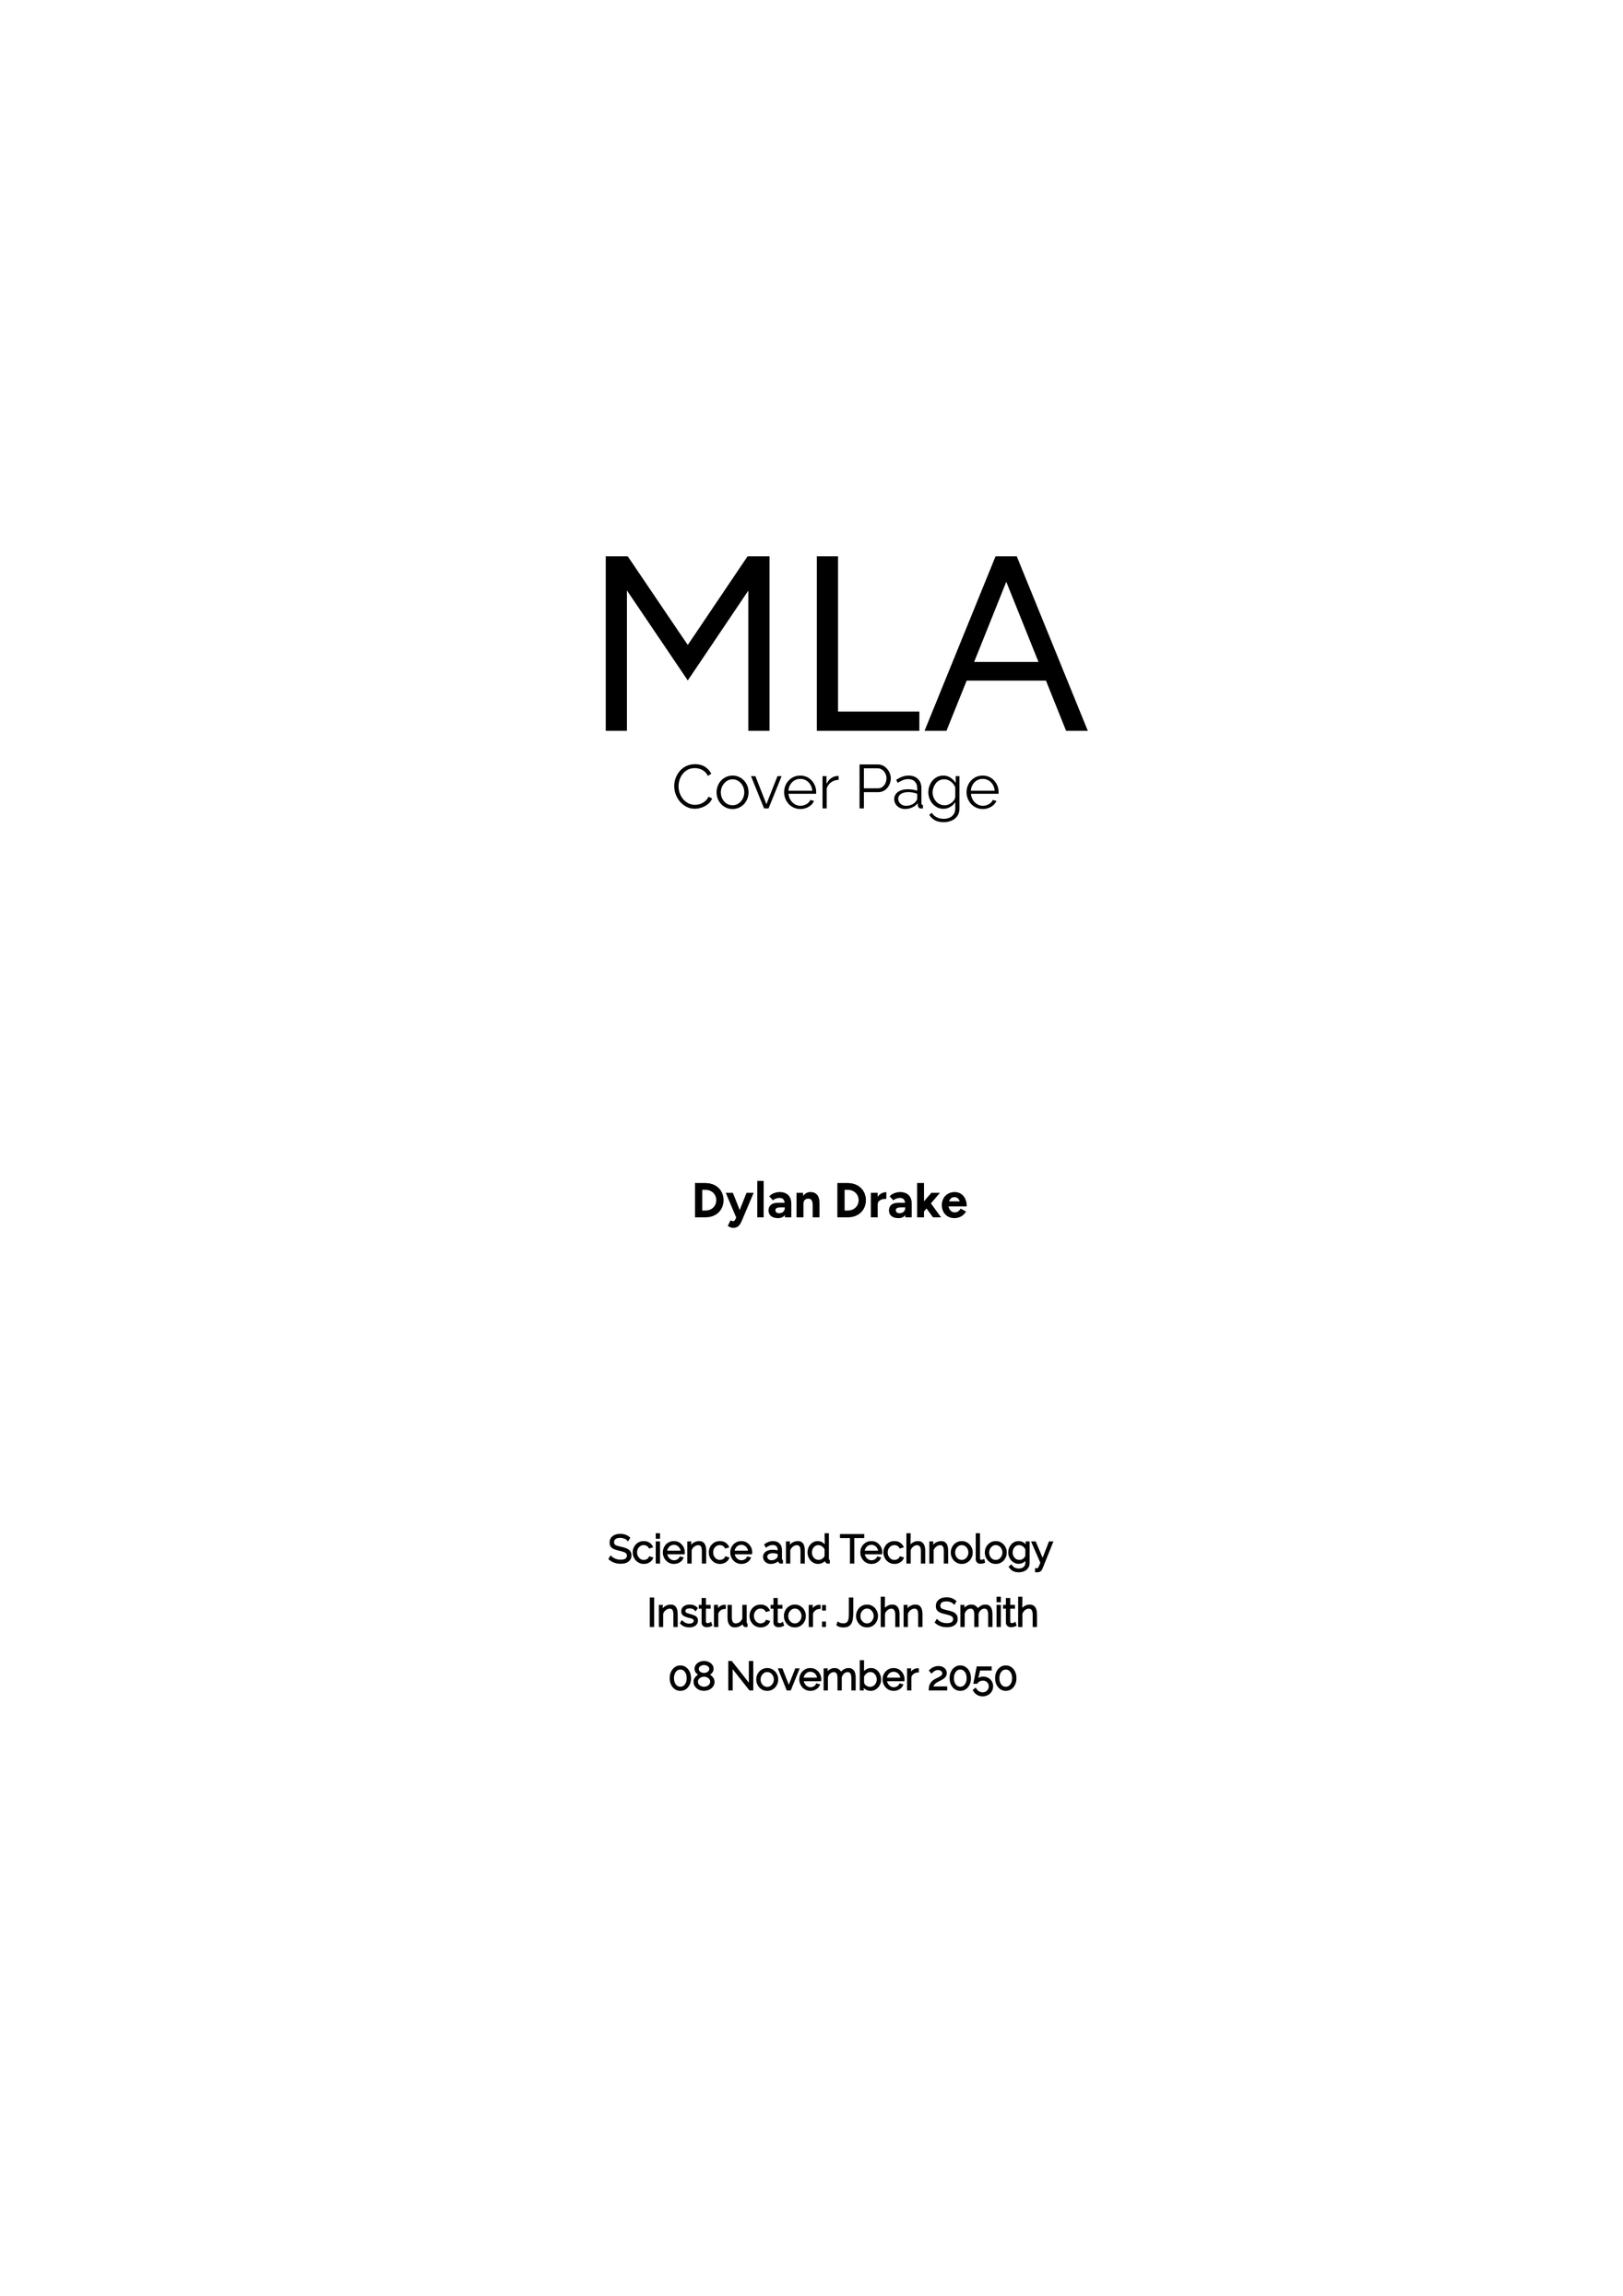 MLA Cover Page